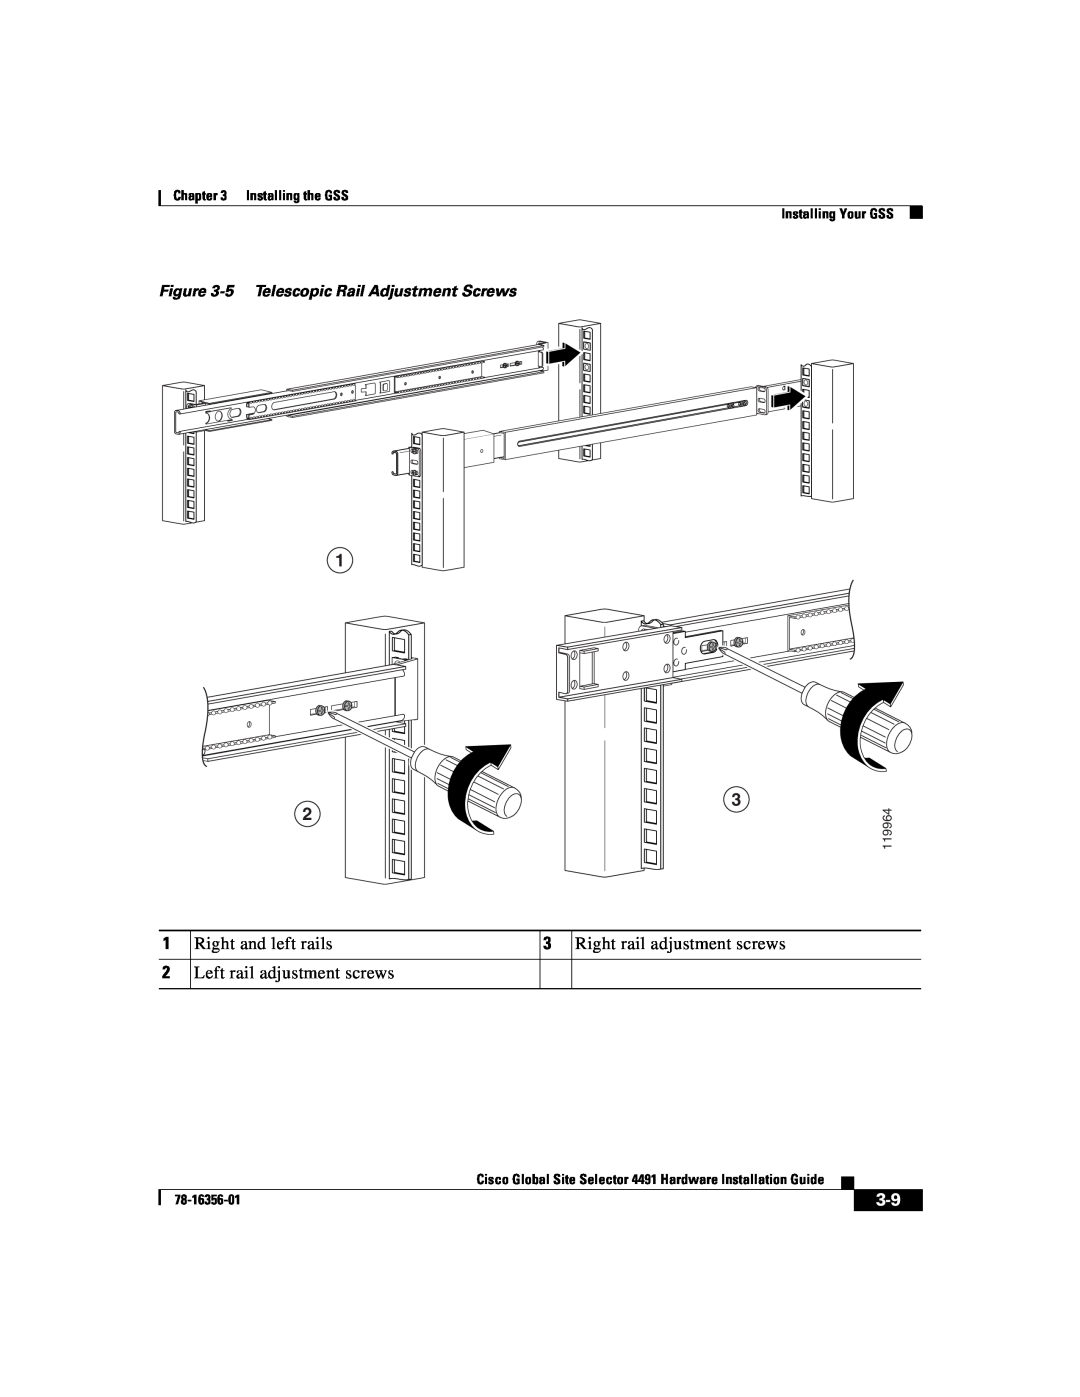 Cisco Systems 78-16356-01 manual 5 Telescopic Rail Adjustment Screws, Installing the GSS Installing Your GSS, 119964 